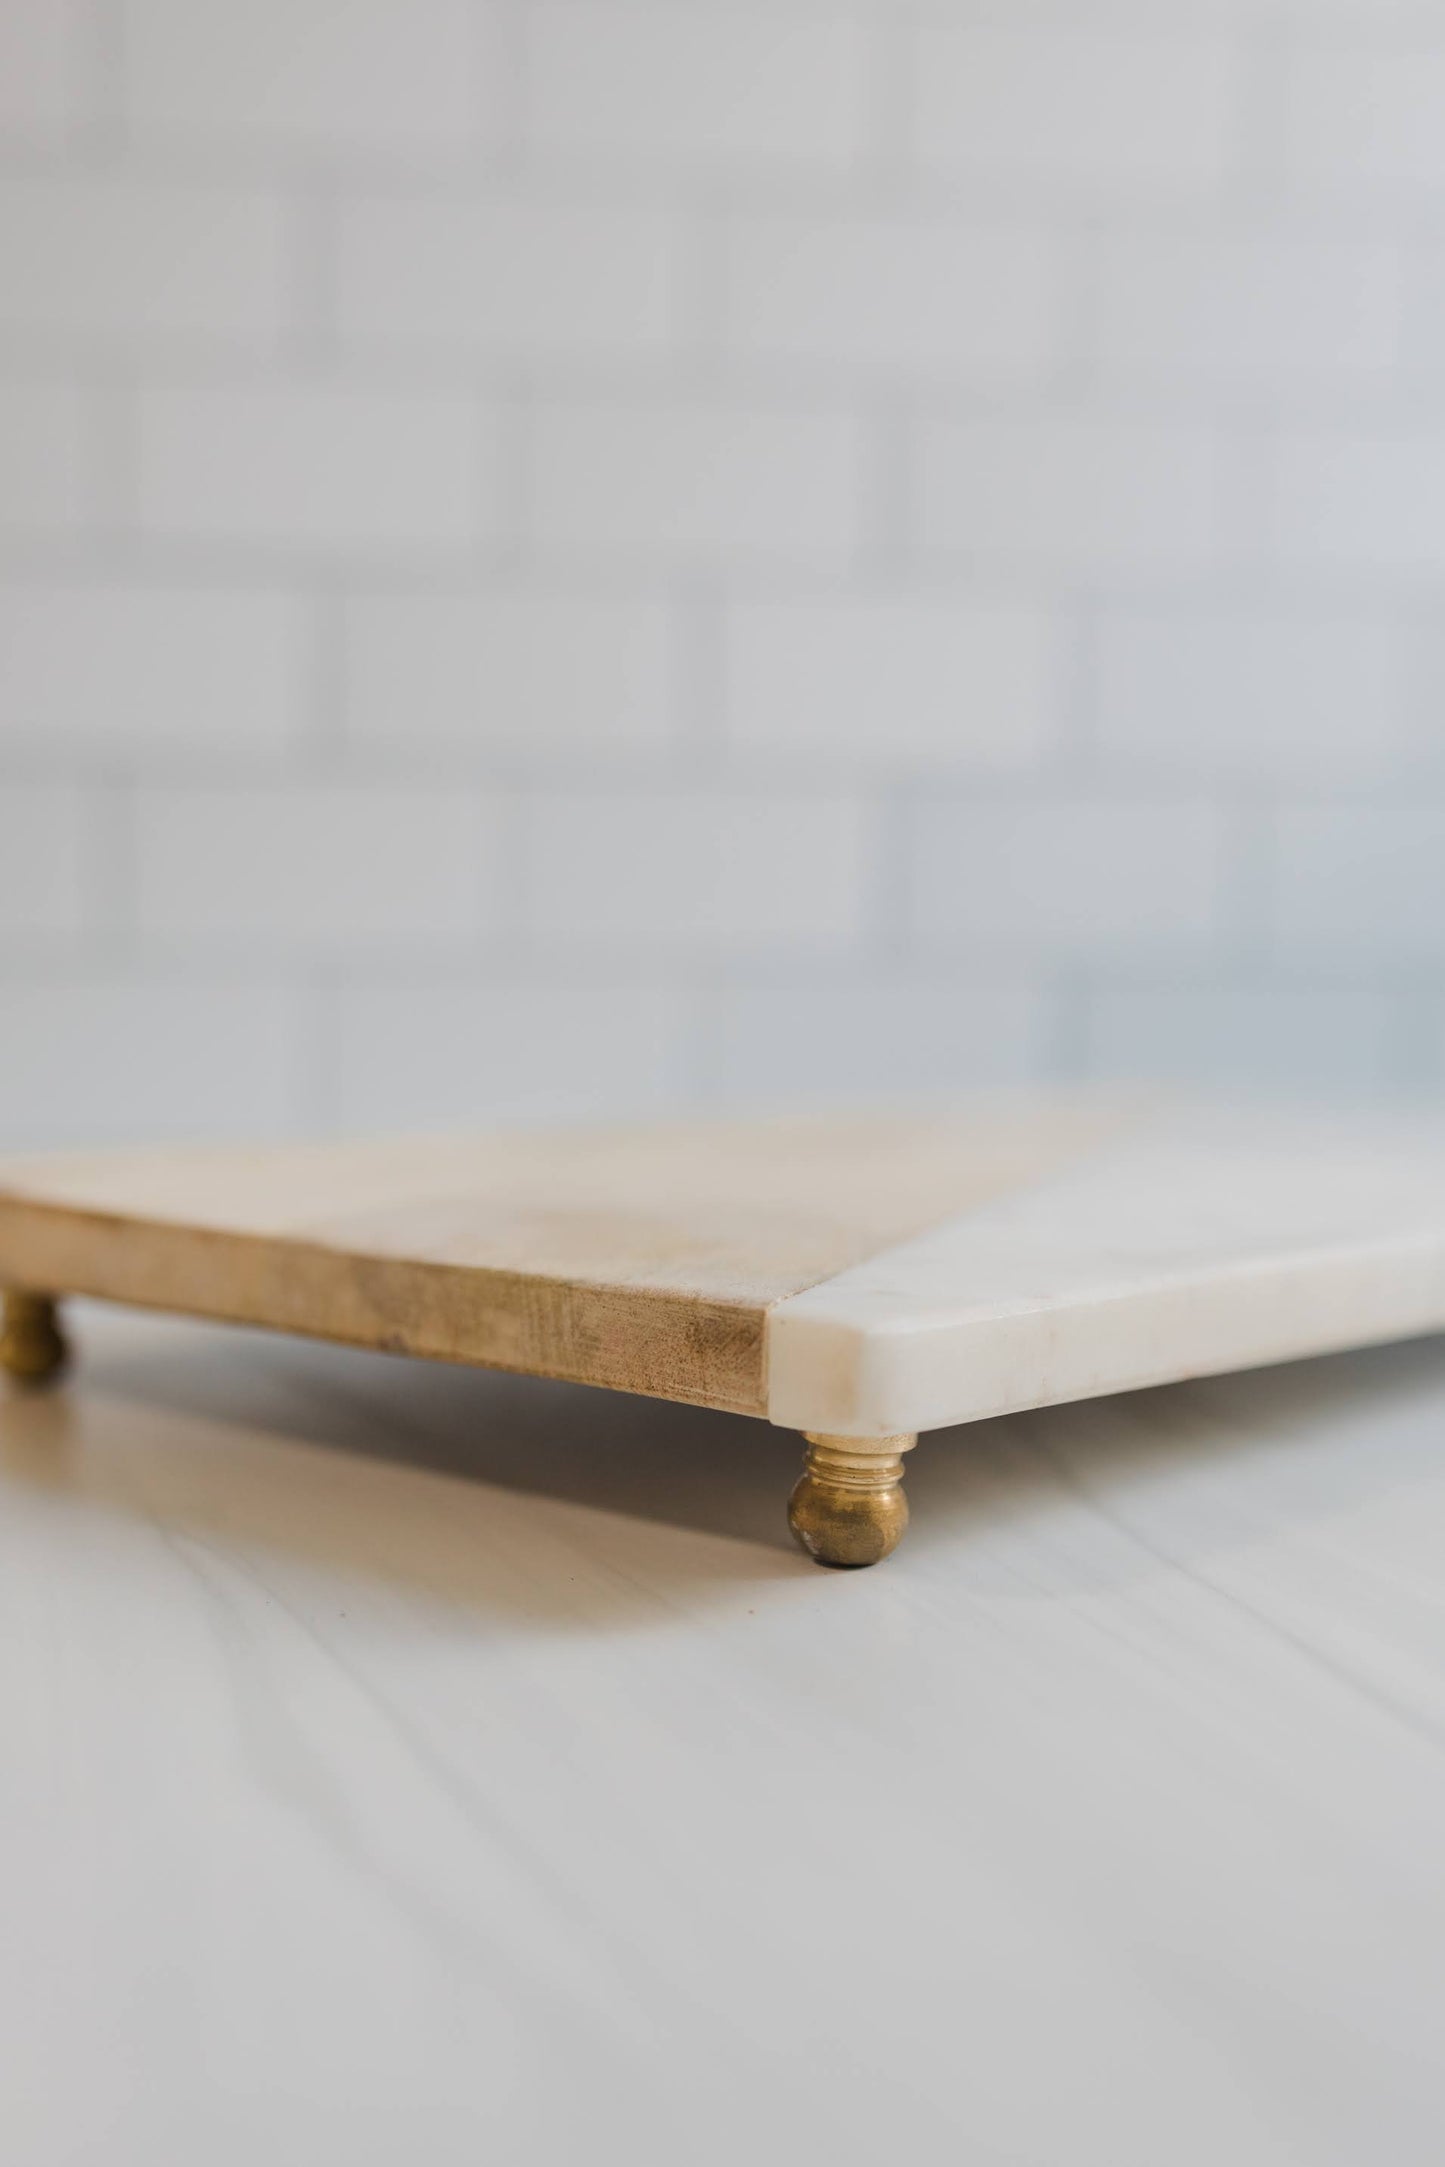 Mango Wood Serving Tray with Brass Feet